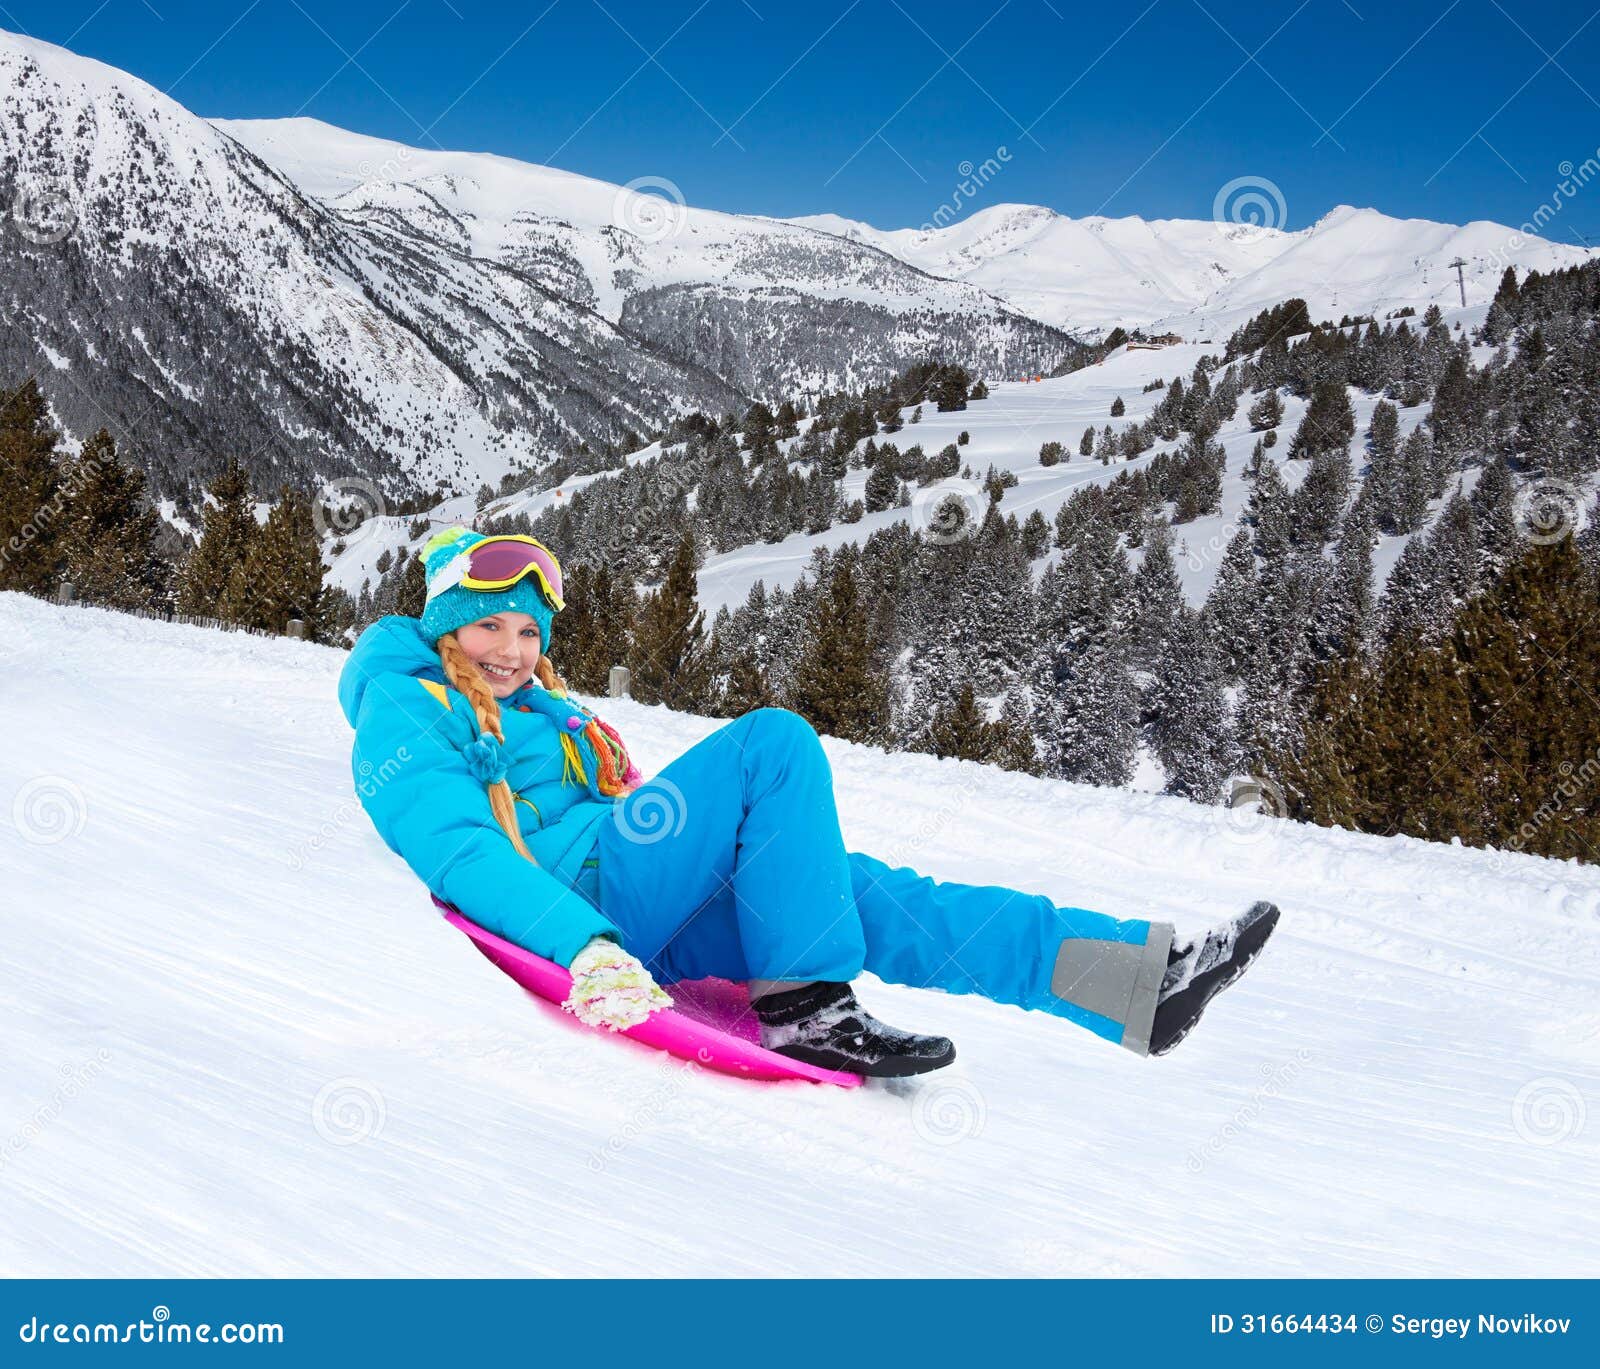 Sliding on Sled from the Mountain Slope Stock Photo - Image of cold,  sleigh: 31664434